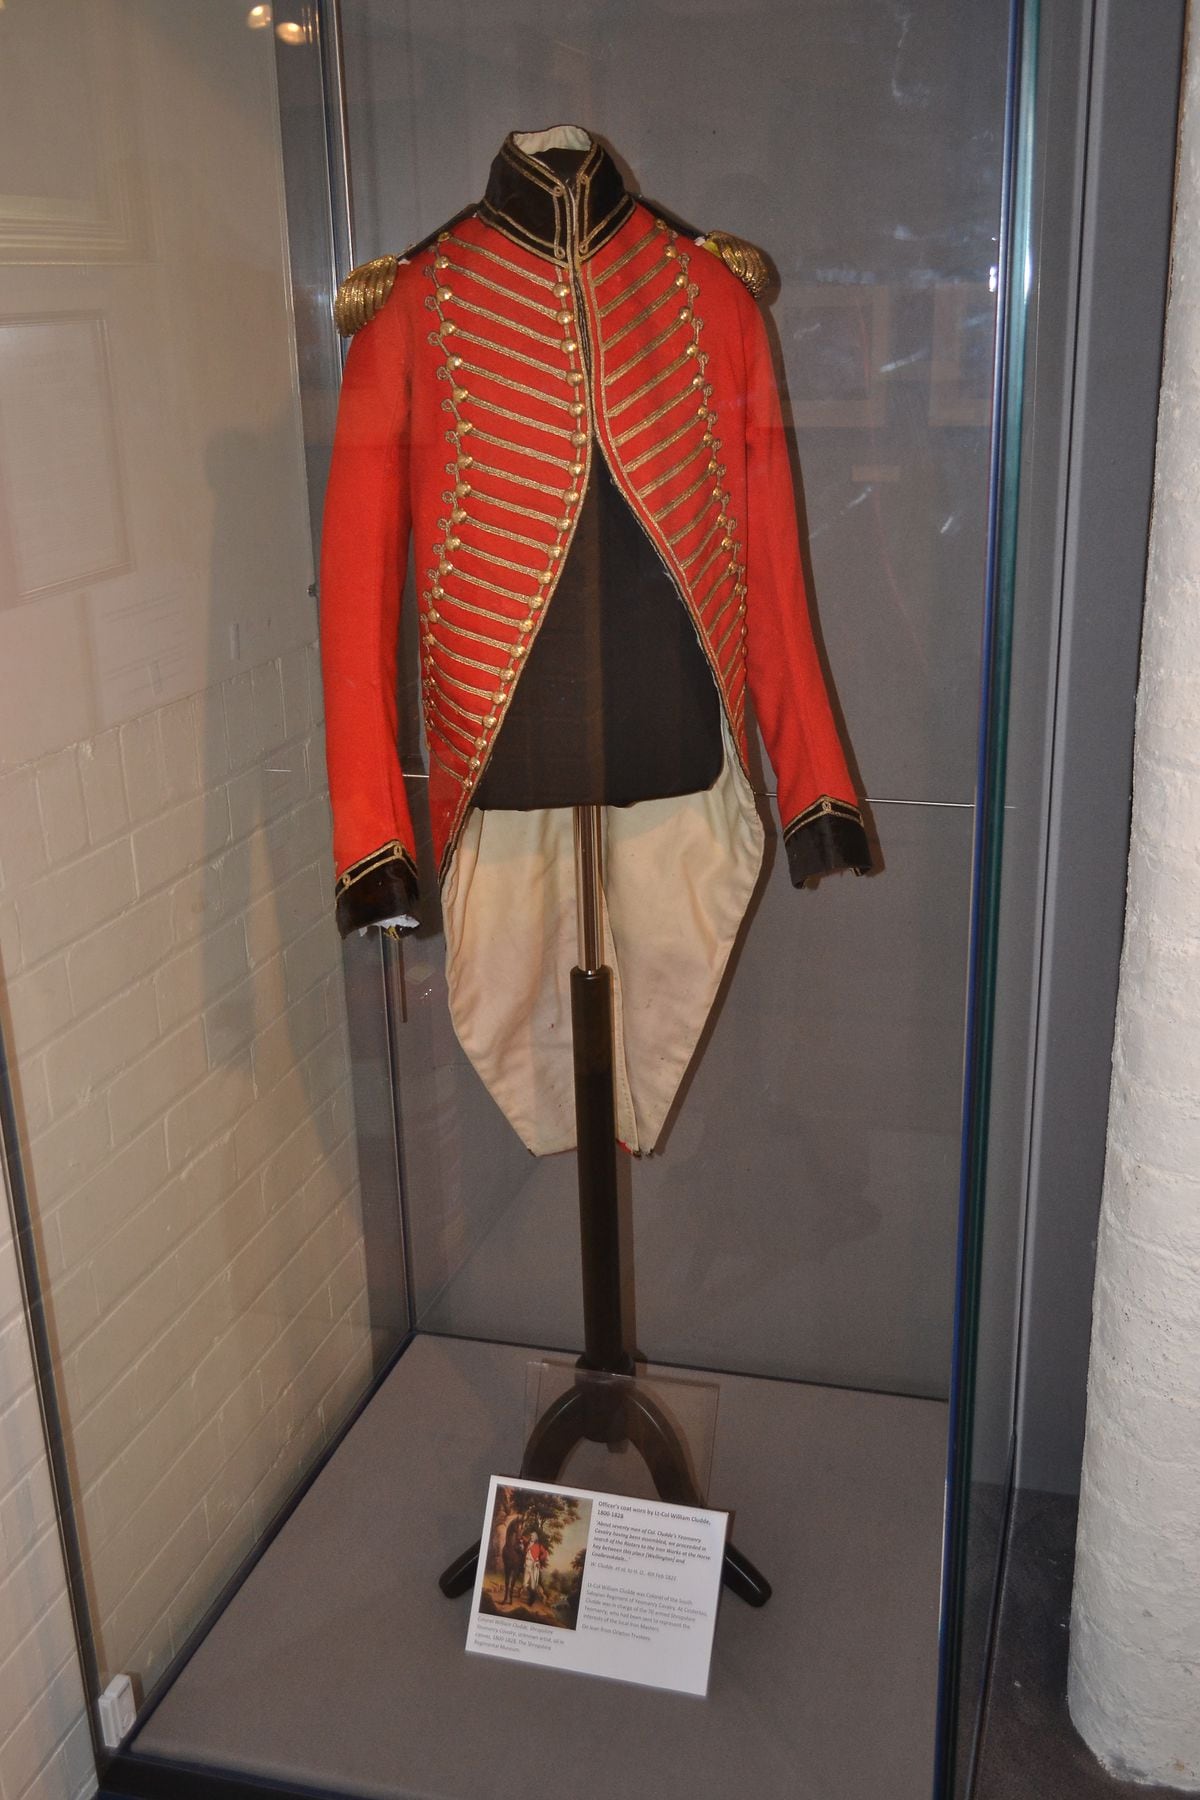 The uniform of Lieutenant Colonel Cludde, who led the troops on that fateful day 200 years ago. 